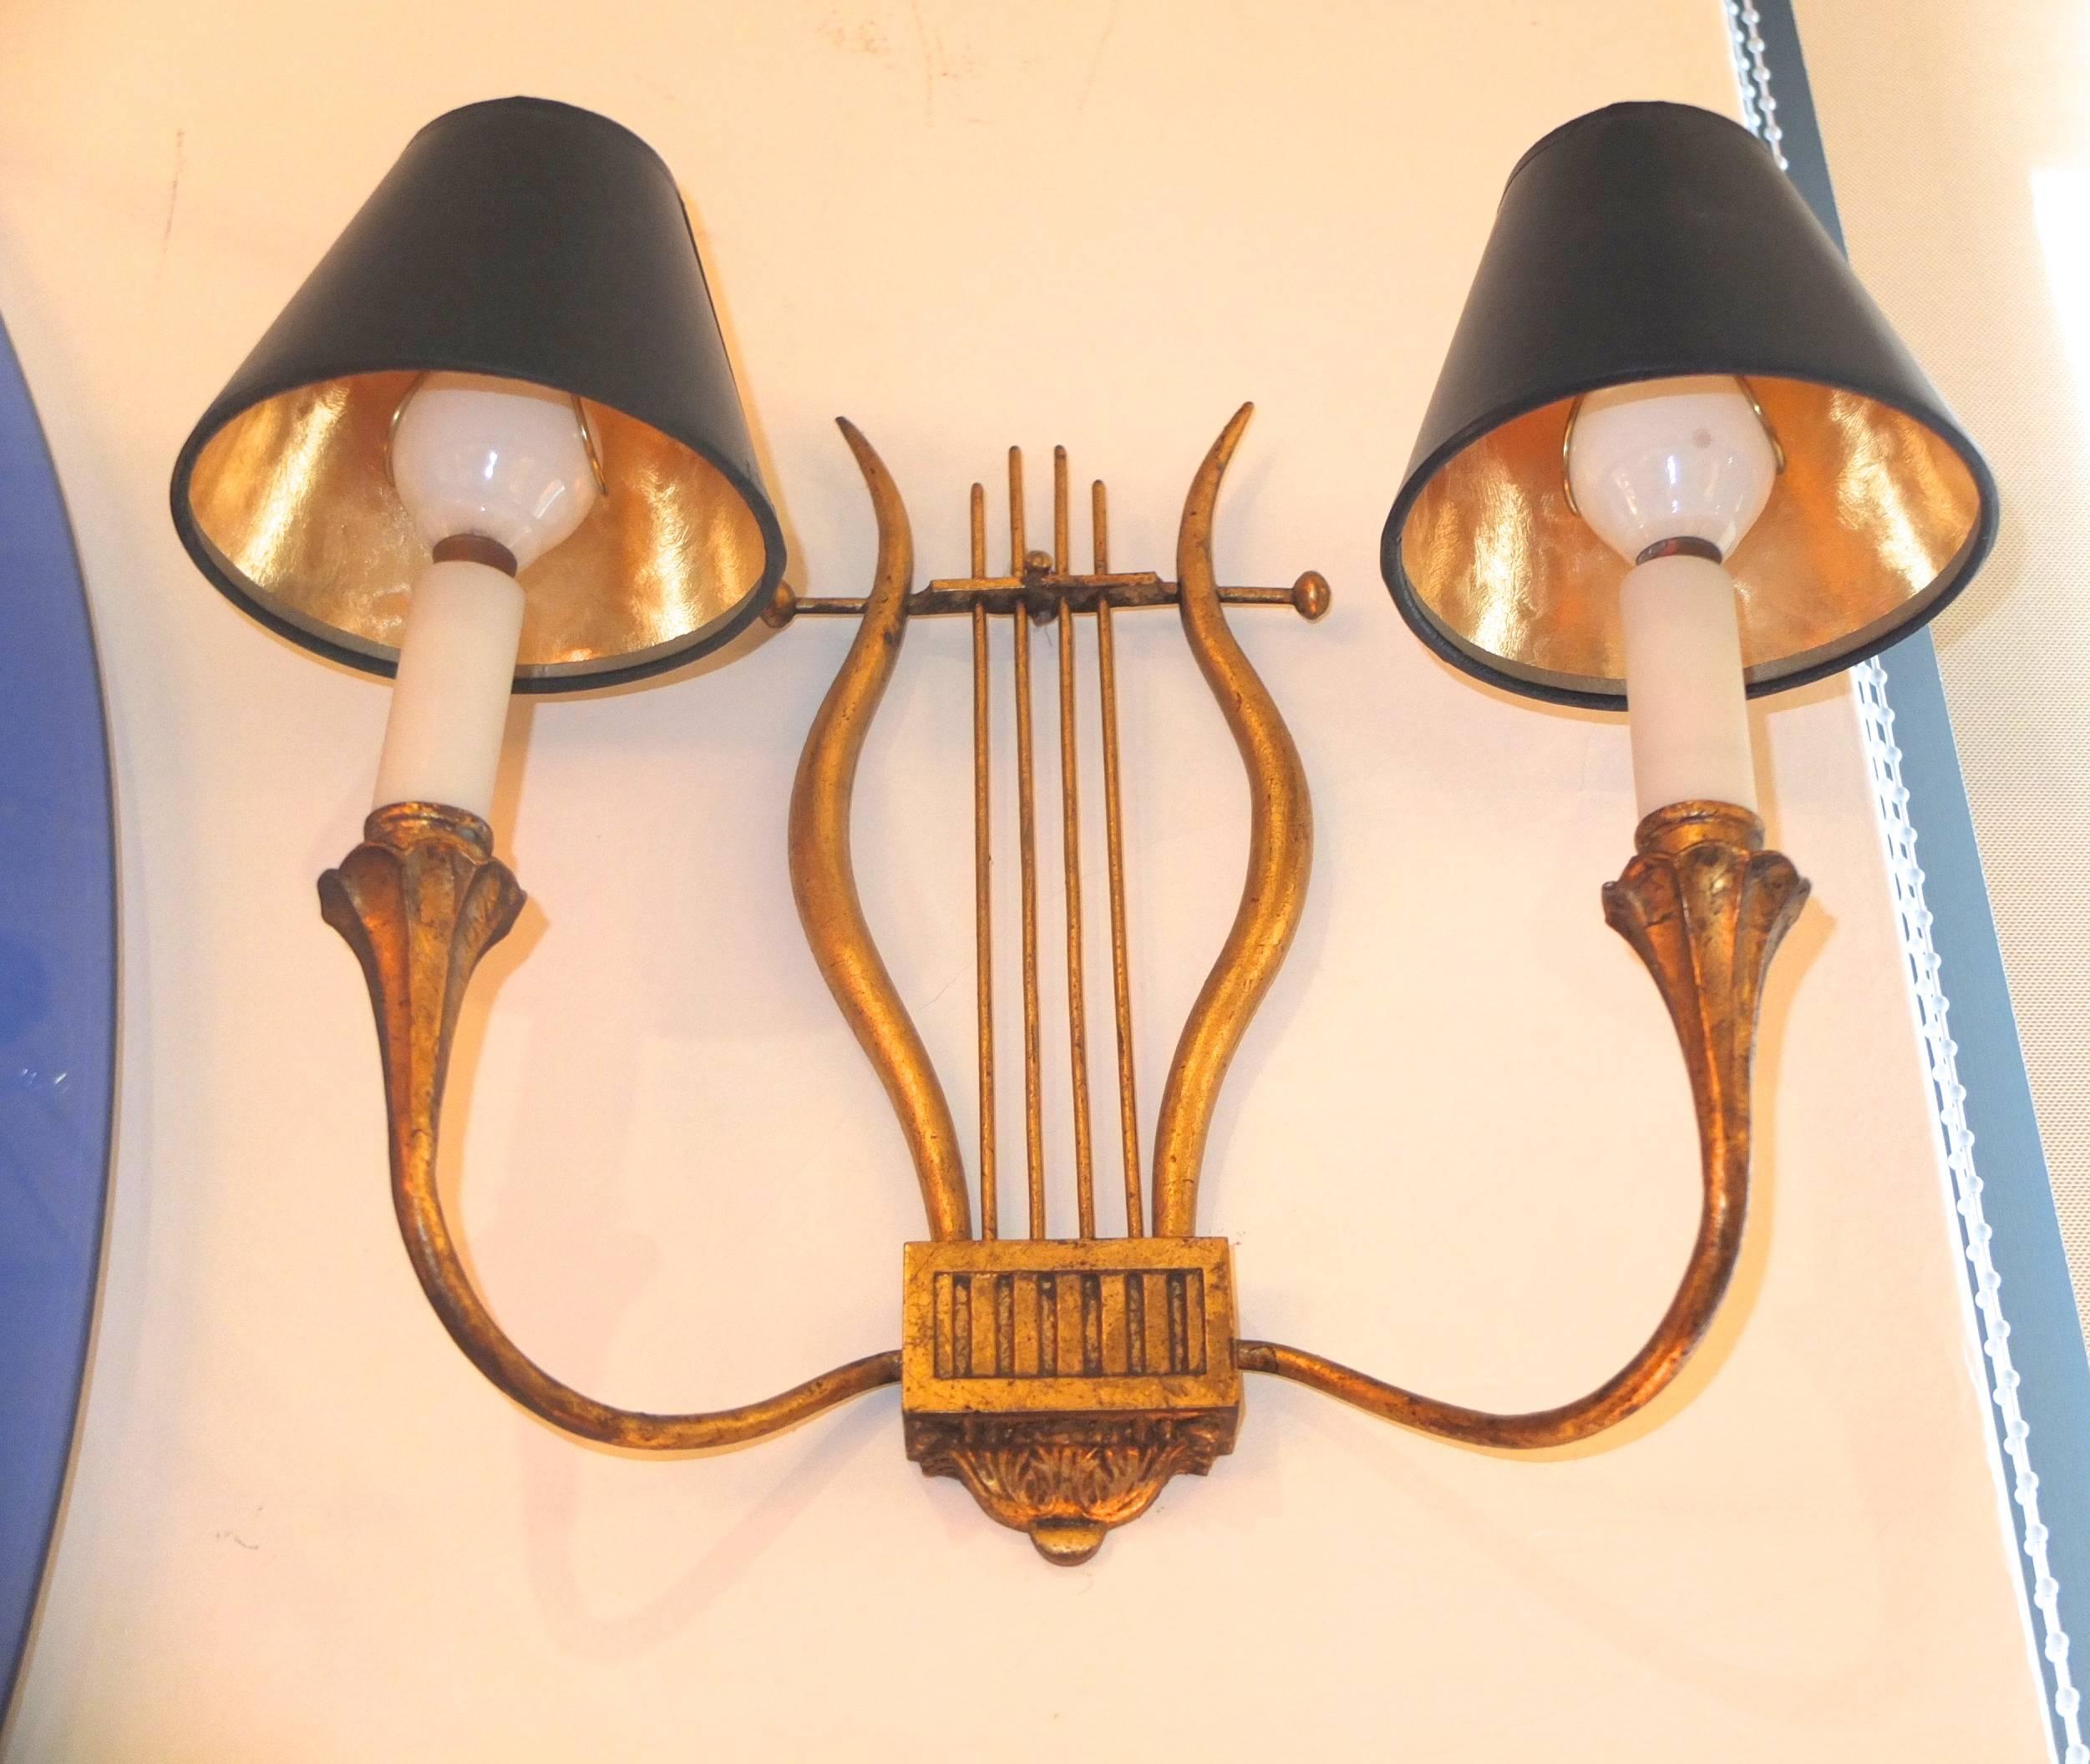 Pair of gilt iron appliques in the form of a lyre created by Marc du Plantier for a private apartment in Madrid, 1940s.
Two pair were created for this apartment, described as neoclassical Avant Garde modernist. We are fortunate to have this pair